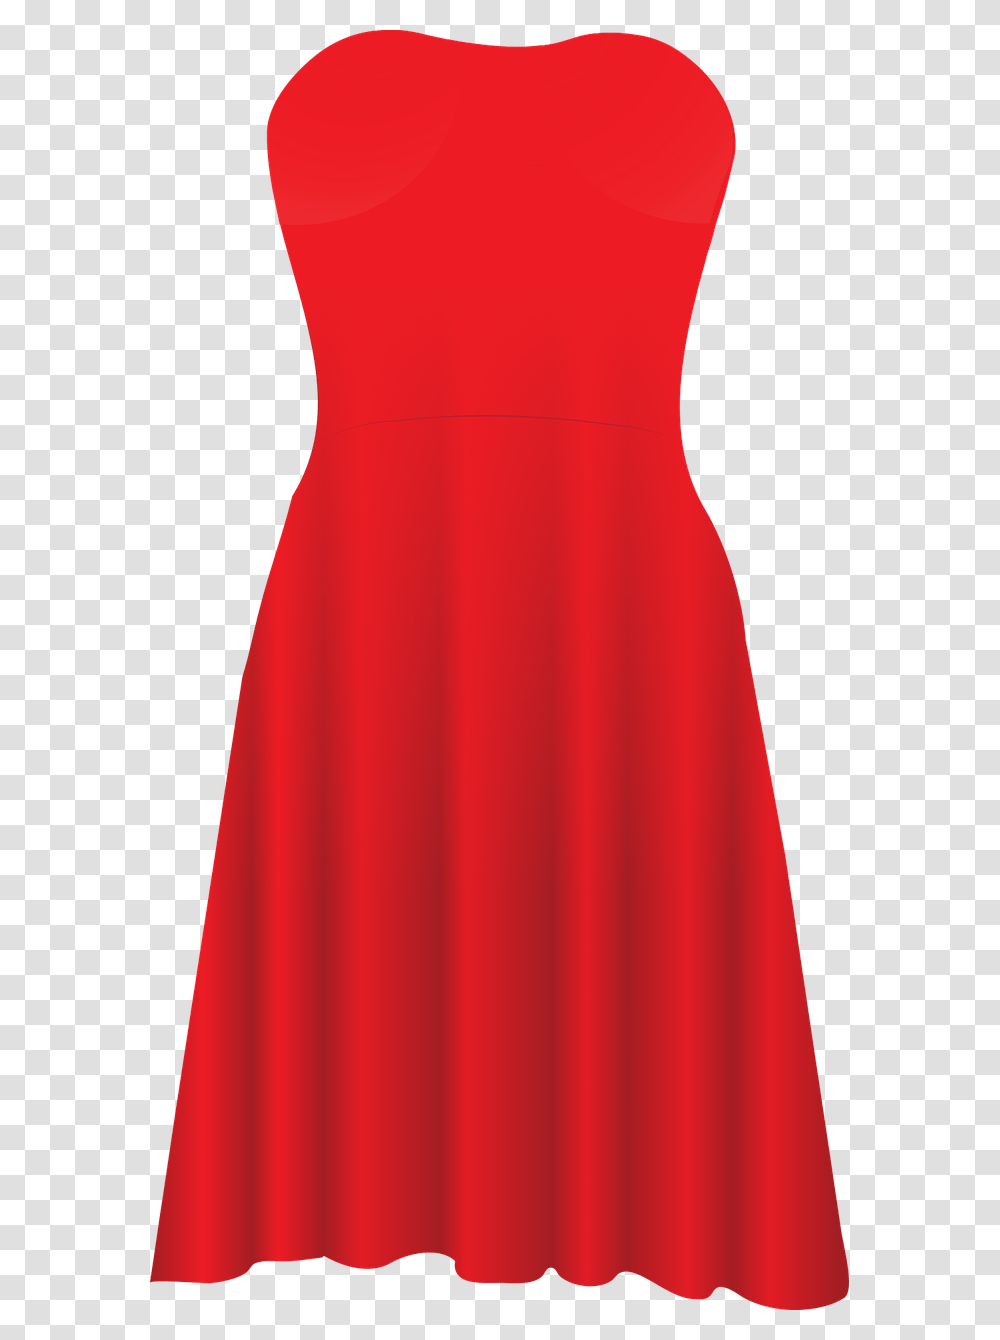 Dress Alpha Channel Clipart Images Dress Icon With Background, Clothing, Apparel, Fashion, Evening Dress Transparent Png